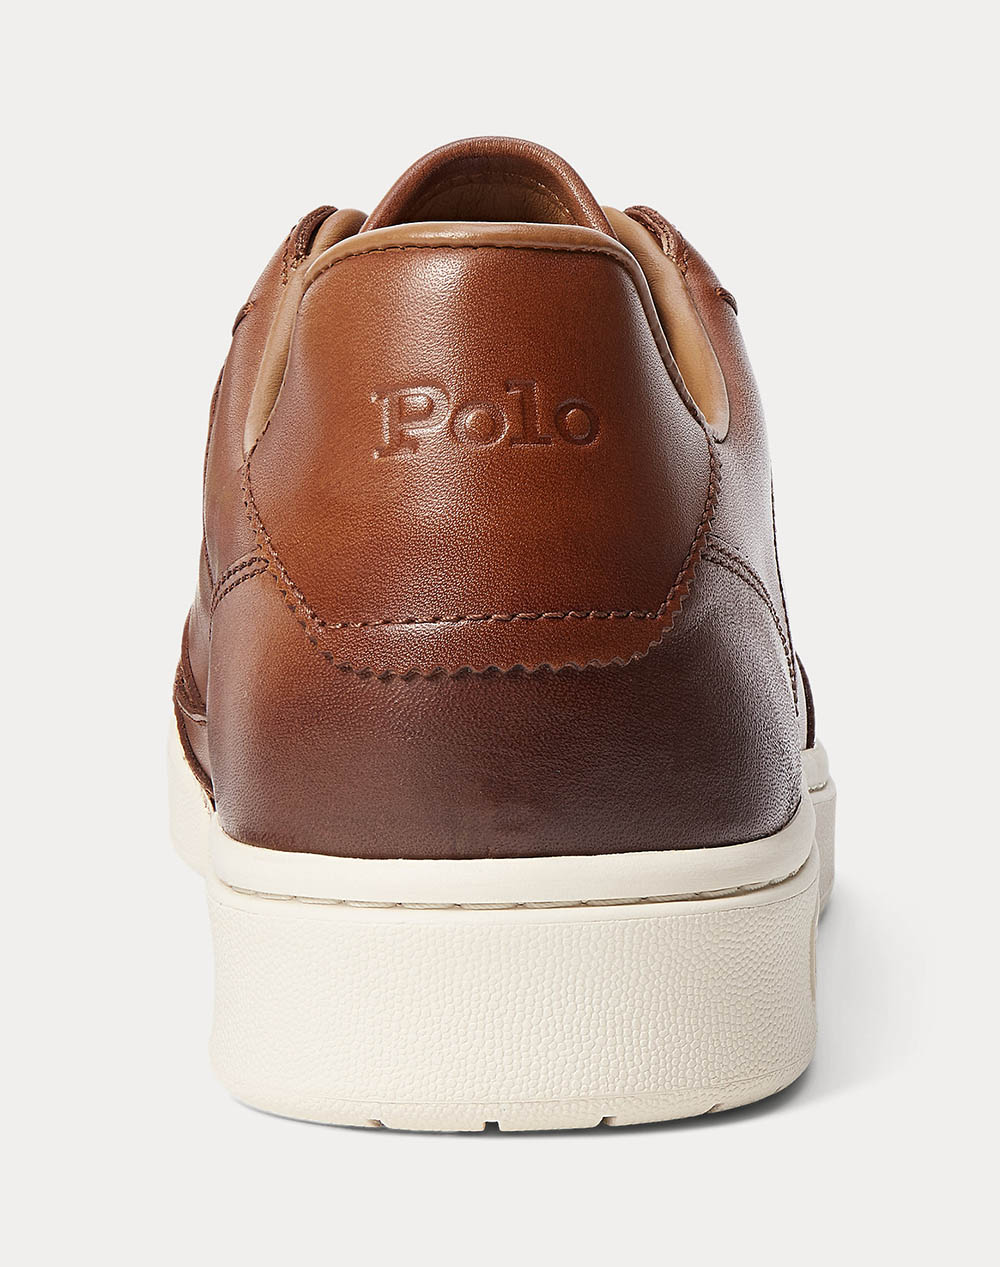 RALPH LAUREN POLO CRT LUX-SNEAKERS-LOW TOP LACE